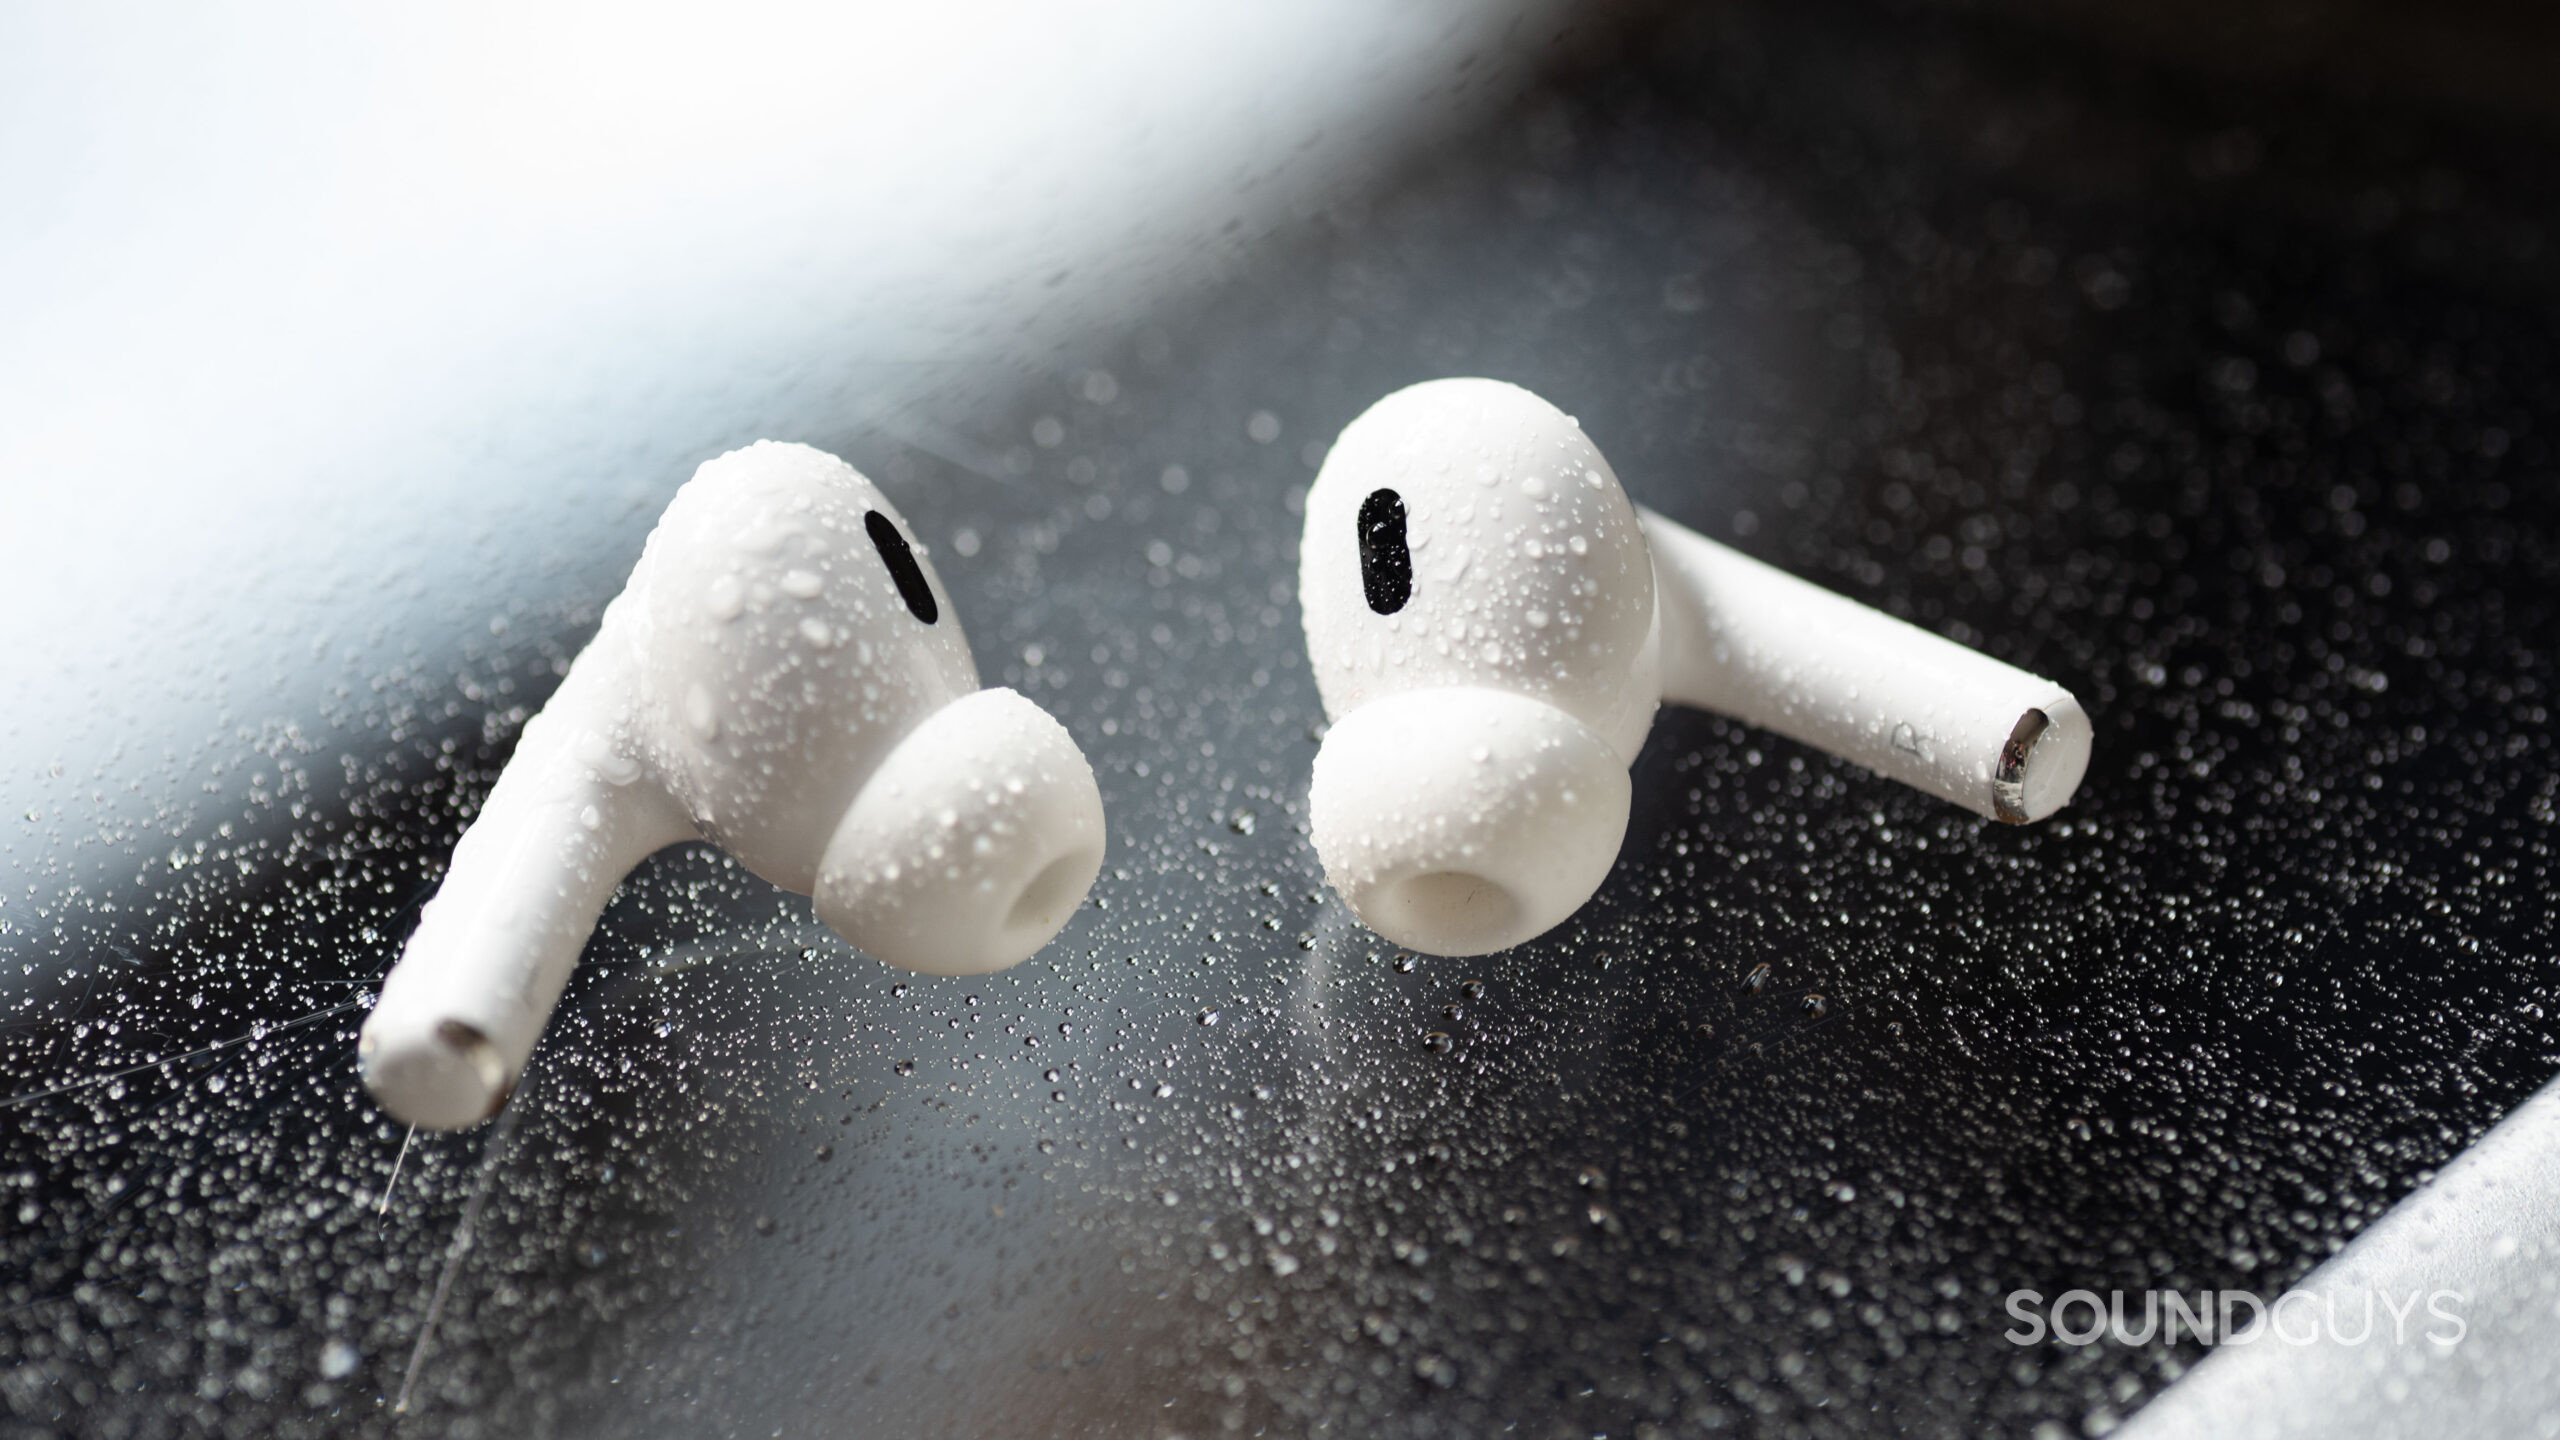 AirPods Pro 3 Release Date and Price - RELEASE DATE ANNOUNCED